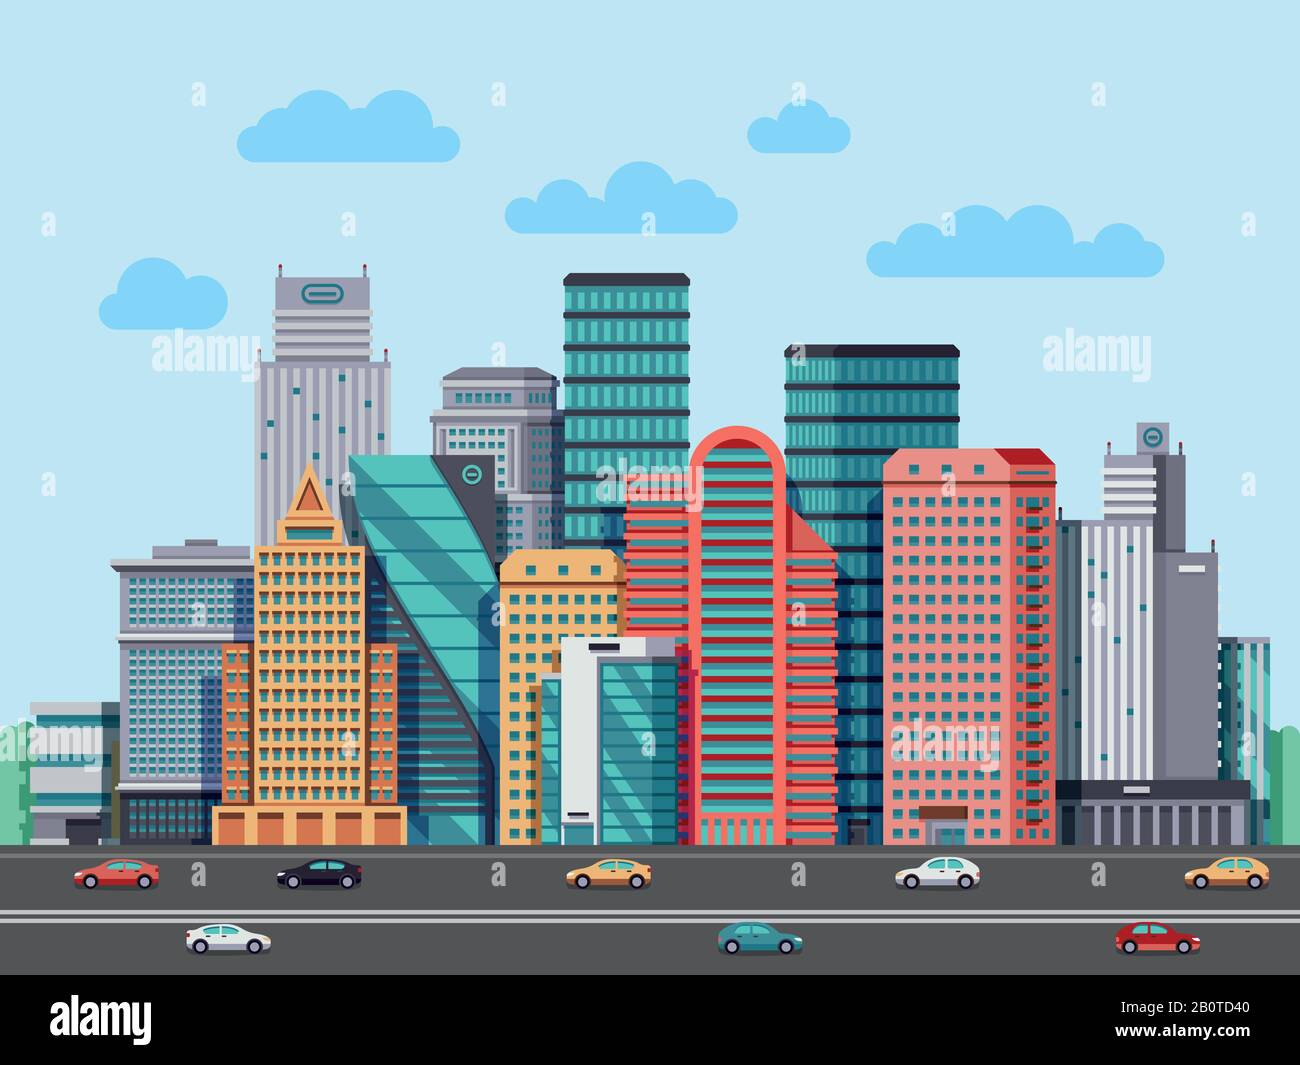 City buildings panorama. Urban architecture vector cityscape background. Architecture buildings cityscape, illustration of urban buisness building district Stock Vector